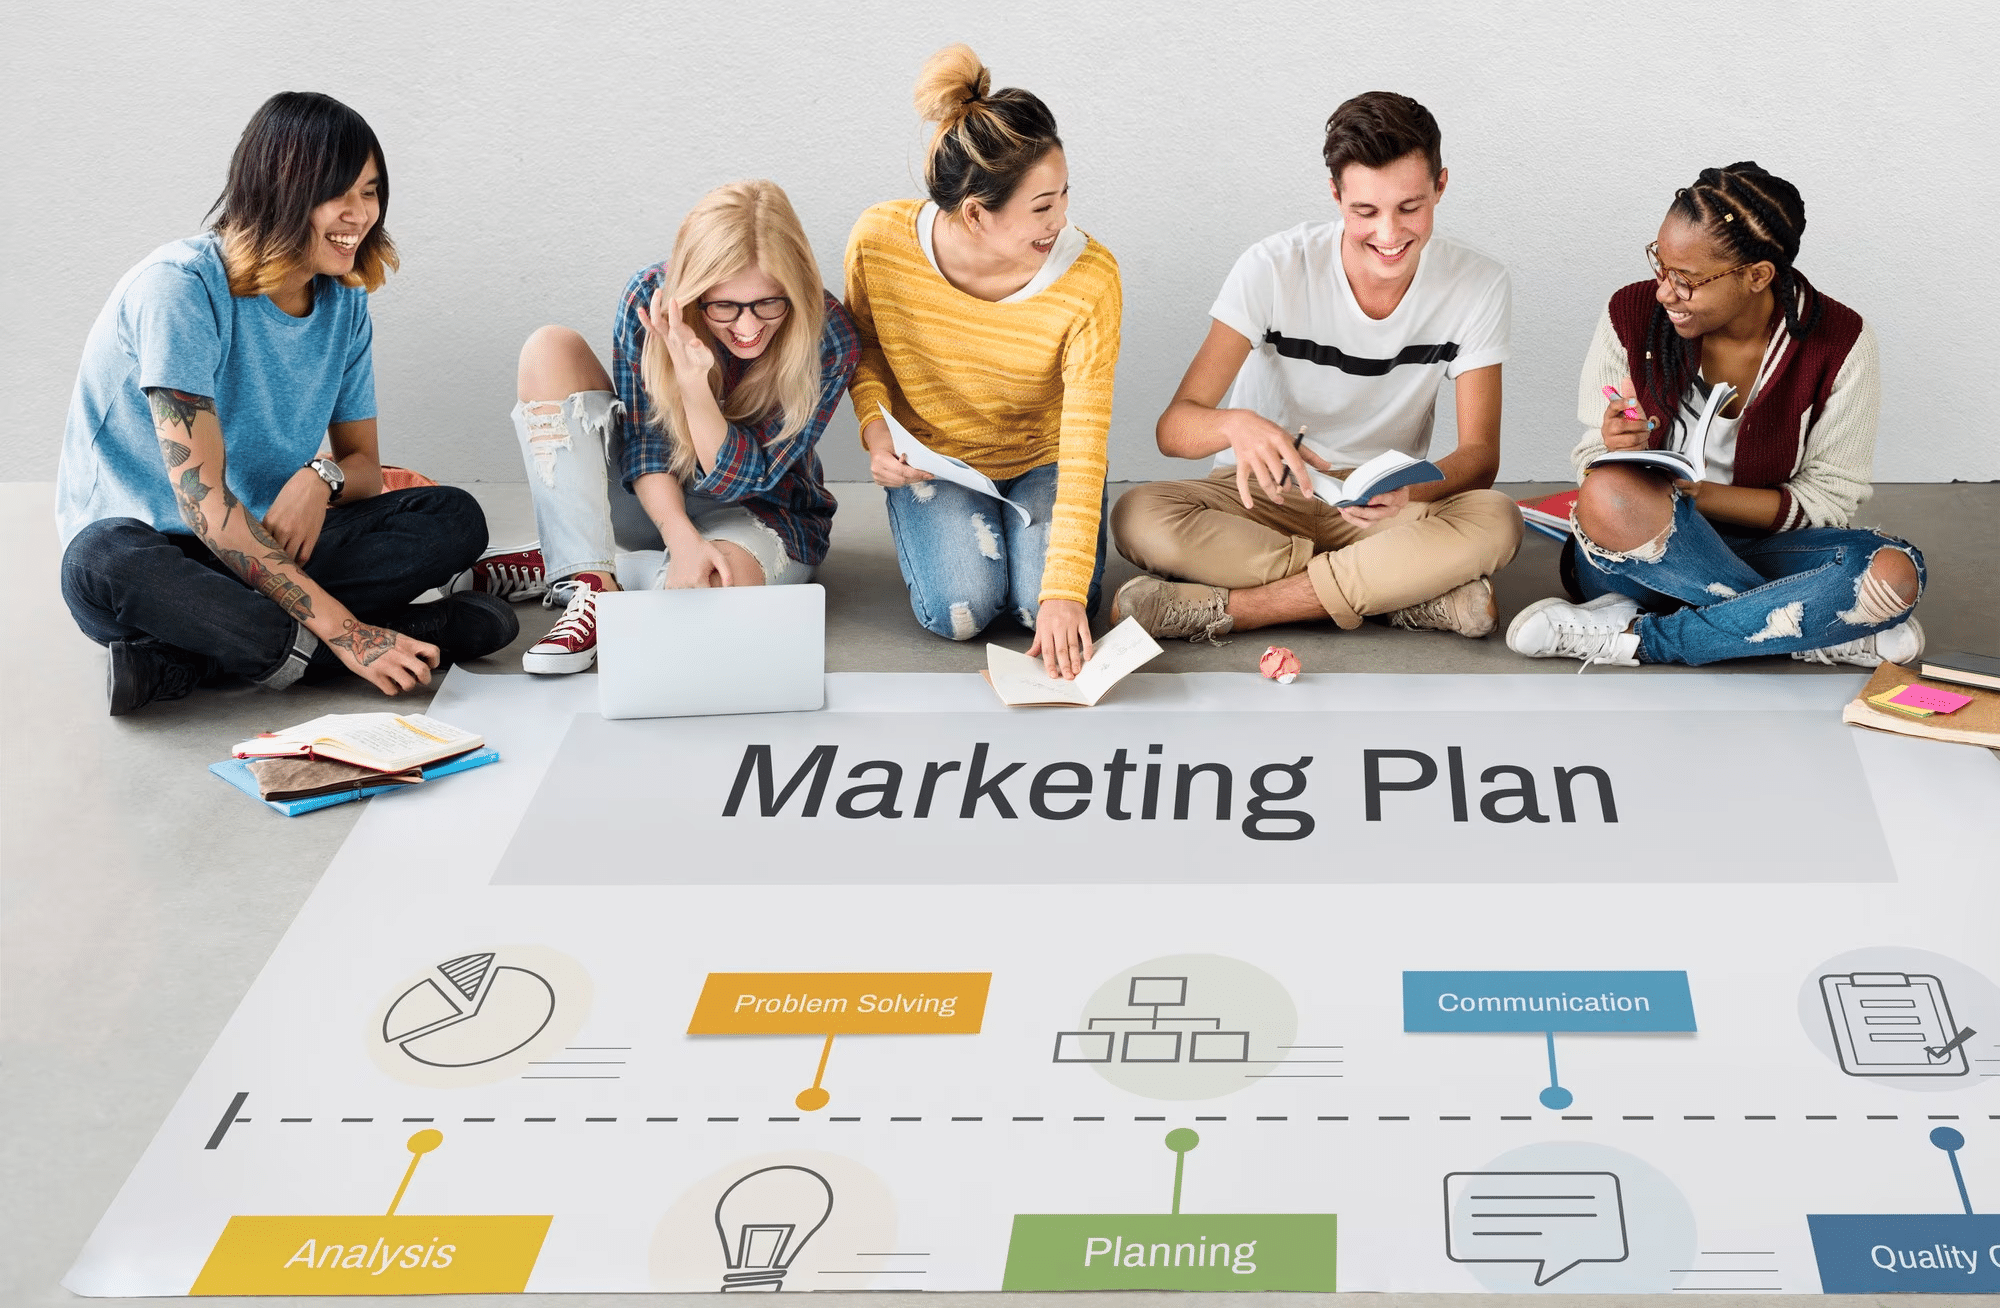 <a href="https://www.freepik.com/free-photo/marketing-plan-achievement-strategy_17433428.htm#query=marketing%20mix%20model&position=24&from_view=search&track=ais">Image by rawpixel.com</a> on Freepik